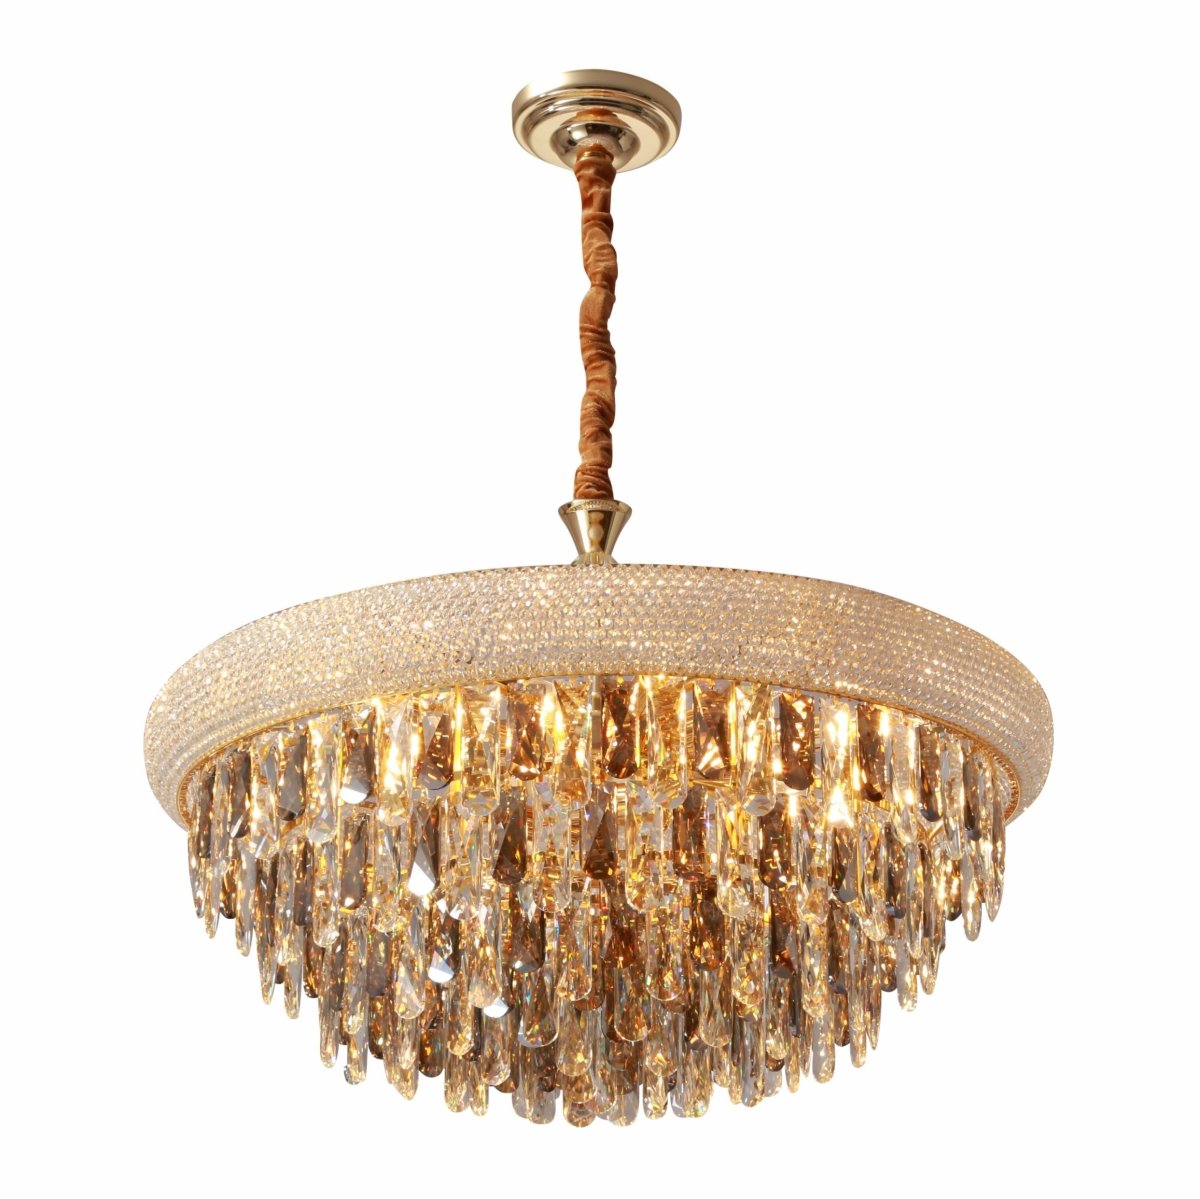 Main image of S-Gold Antique Brass Metal and Crystal Chandelier D800 with 15xE14 Fitting | TEKLED 158-19864